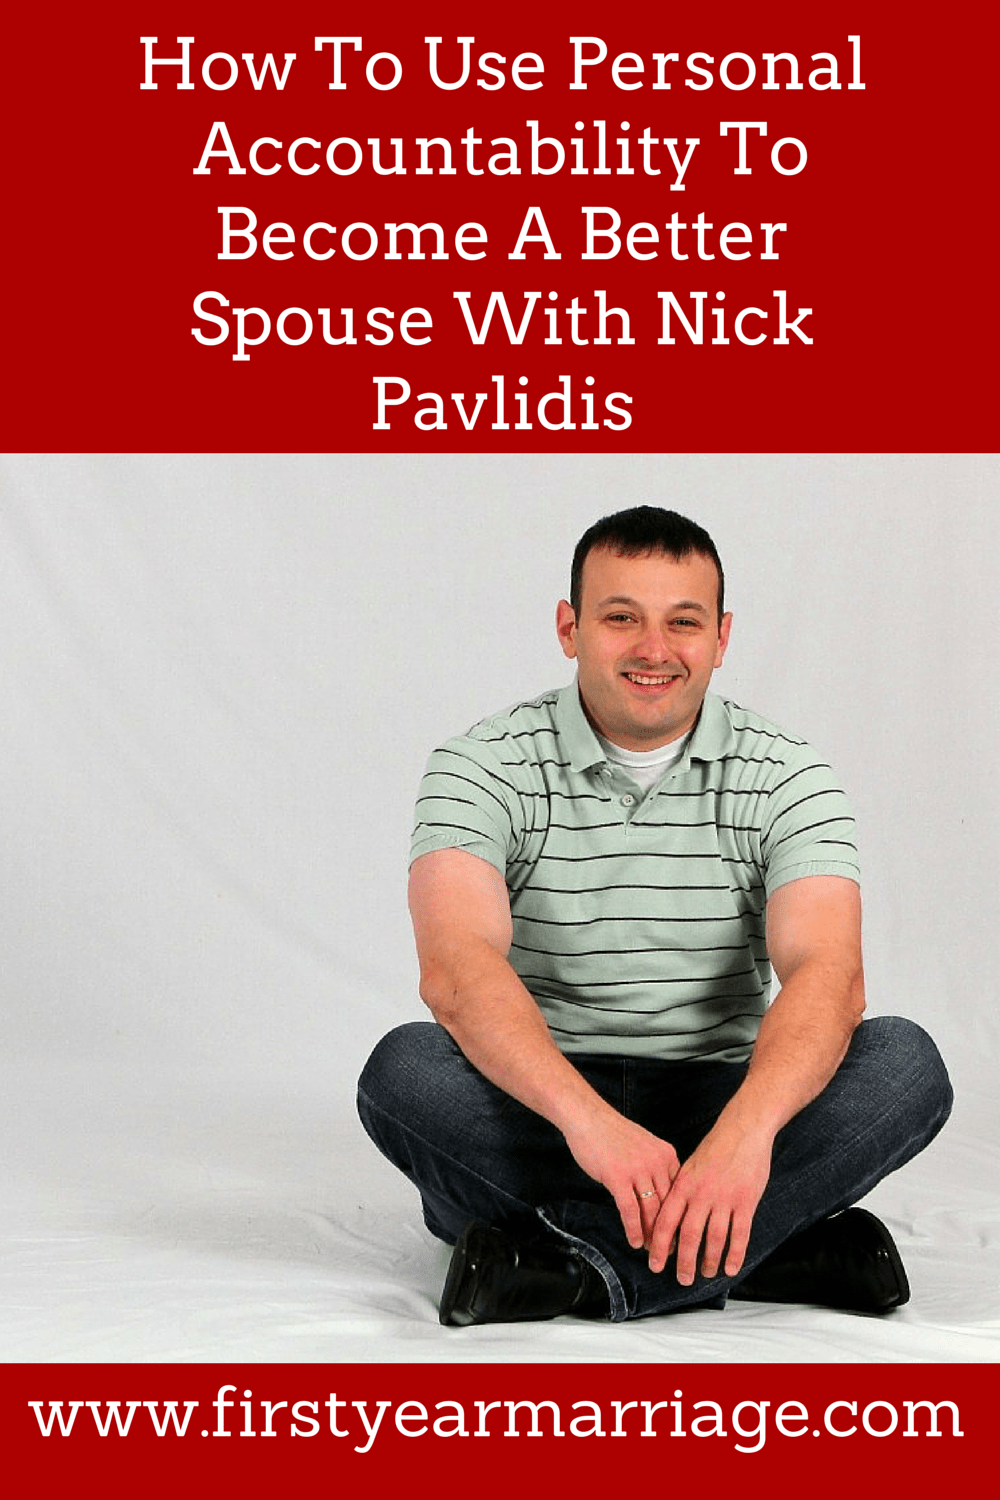 How To Use Personal Accountability To Become A Better Spouse With Nick Pavlidis